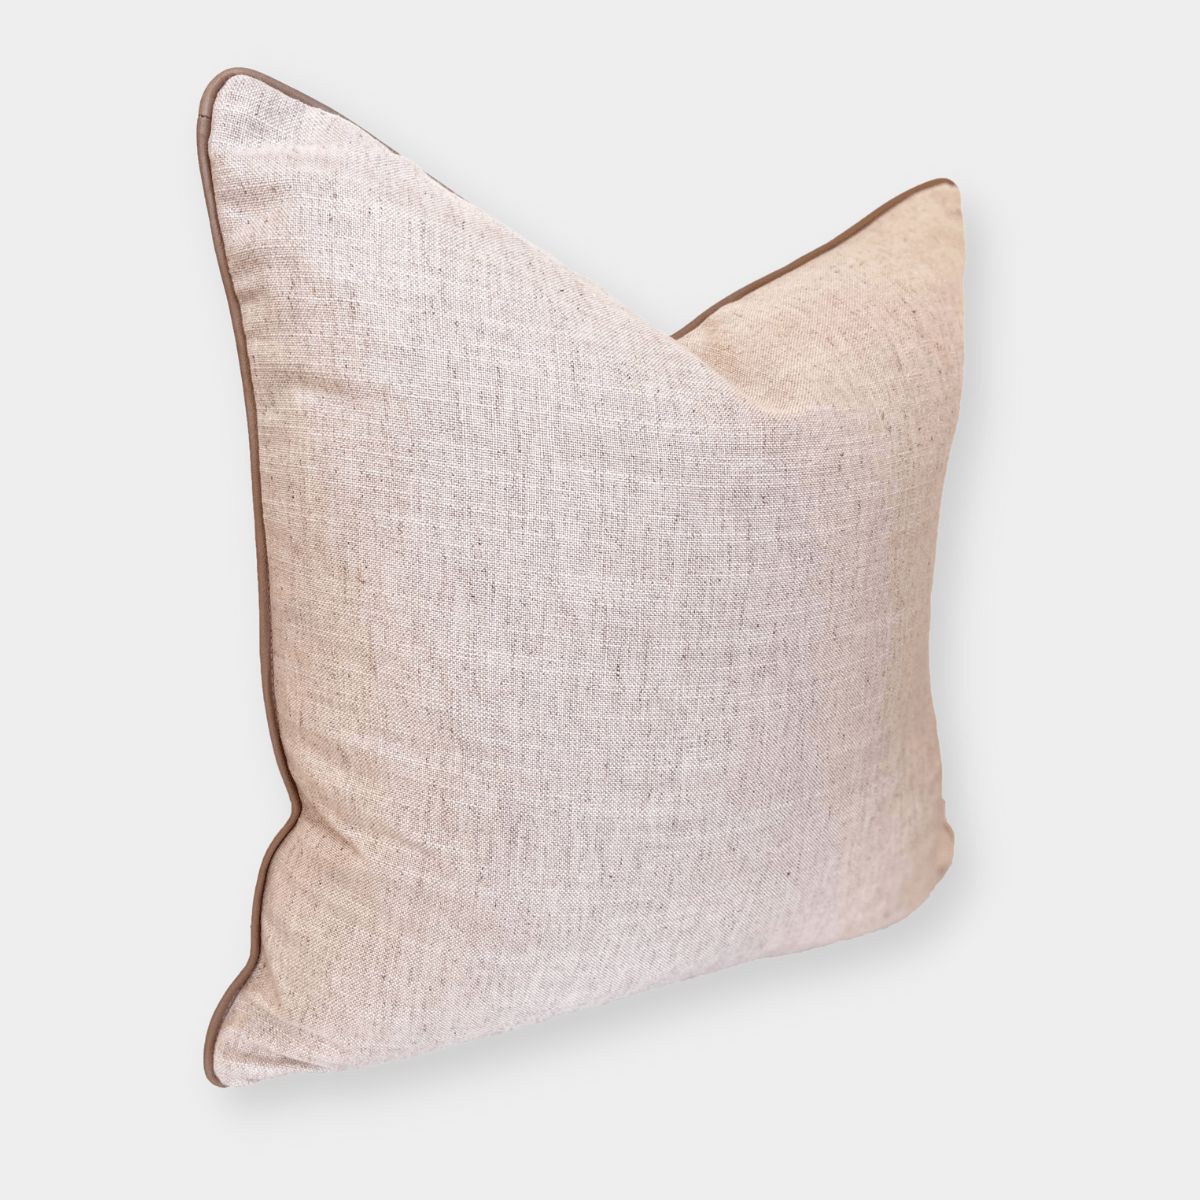 norsuHOME Cushions norsuHOME Cushion, Lexus Rosewater with Blush Leather Piping (4753705467988)